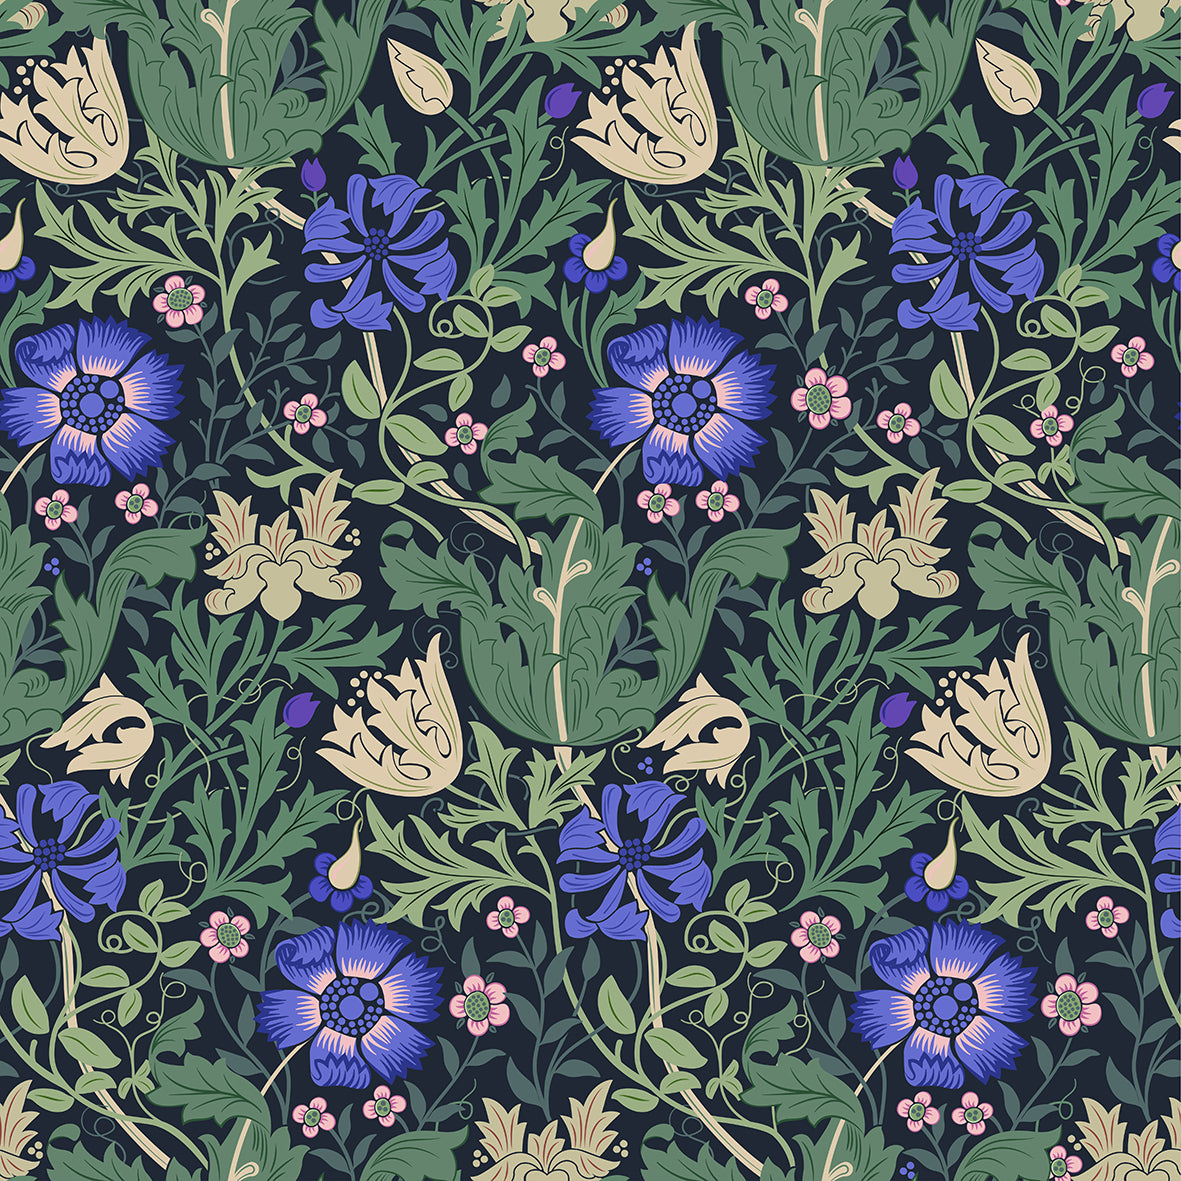 william-morris-co-microfibre-pillow-sham-compton-collection-bluebell-cottage-x1-3